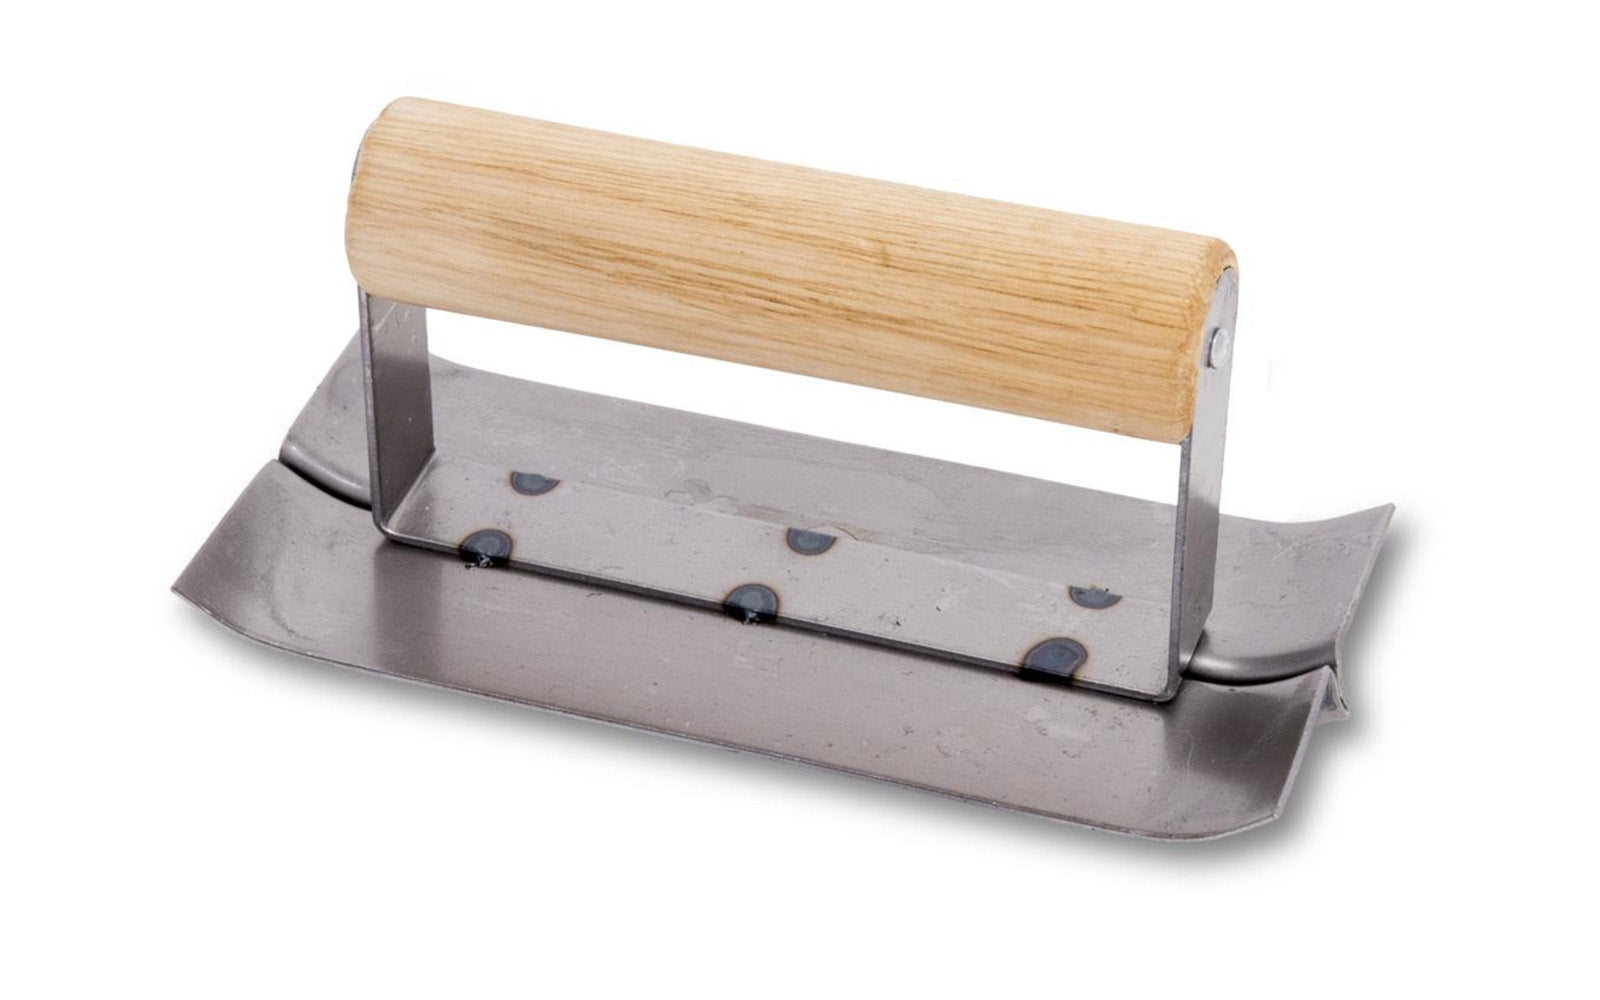 Marshalltown 6" x 2-3/4" Steel Hand Groover. Contractor-grade QLT Steel Hand Groovers create grooves in concrete slabs in order to control cracks. Model 91 ~ 035965064910